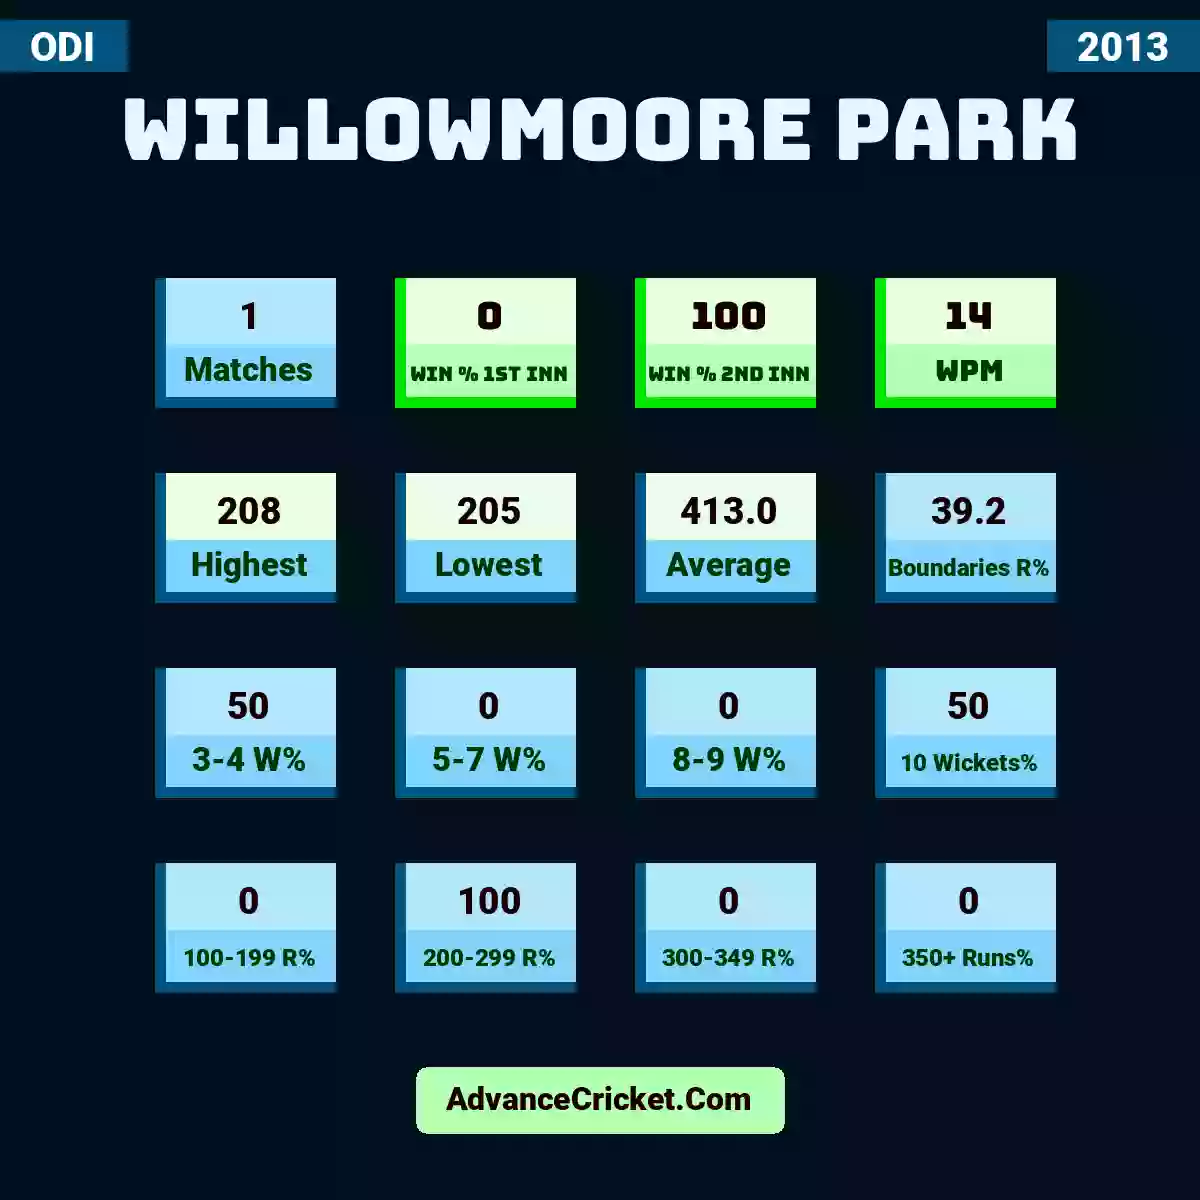 Image showing Willowmoore Park with Matches: 1, Win % 1st Inn: 0, Win % 2nd Inn: 100, WPM: 14, Highest: 208, Lowest: 205, Average: 413.0, Boundaries R%: 39.2, 3-4 W%: 50, 5-7 W%: 0, 8-9 W%: 0, 10 Wickets%: 50, 100-199 R%: 0, 200-299 R%: 100, 300-349 R%: 0, 350+ Runs%: 0.